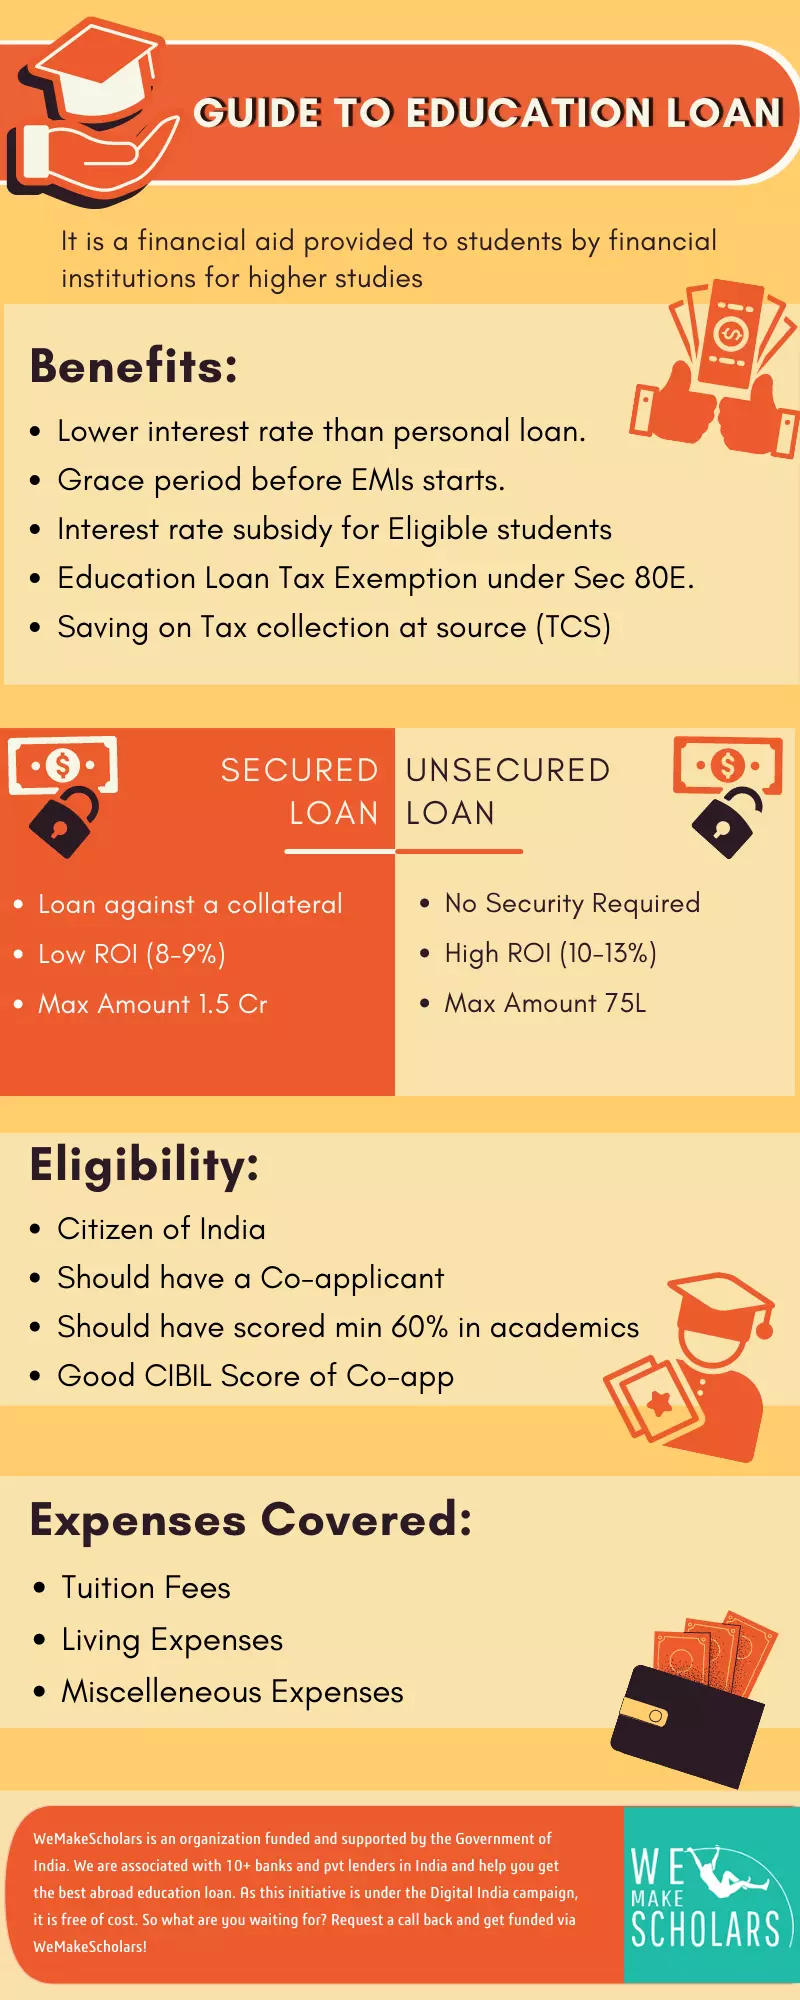 Guide for abroad education loan